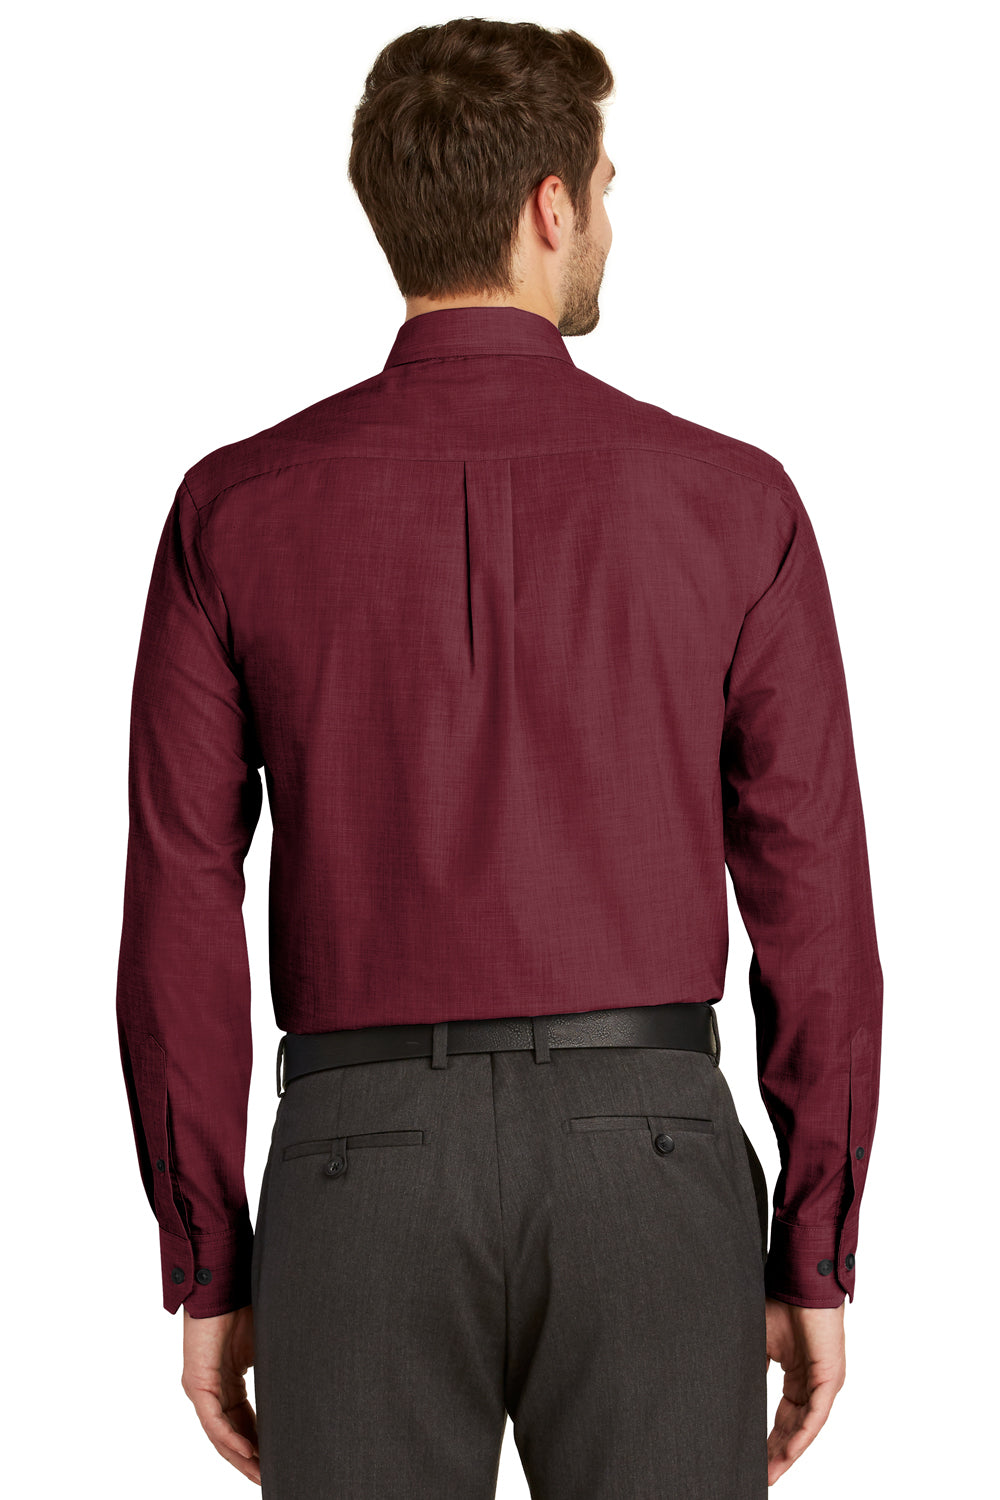 Port Authority S640 Mens Easy Care Wrinkle Resistant Long Sleeve Button Down Shirt w/ Pocket Red Oxide Back